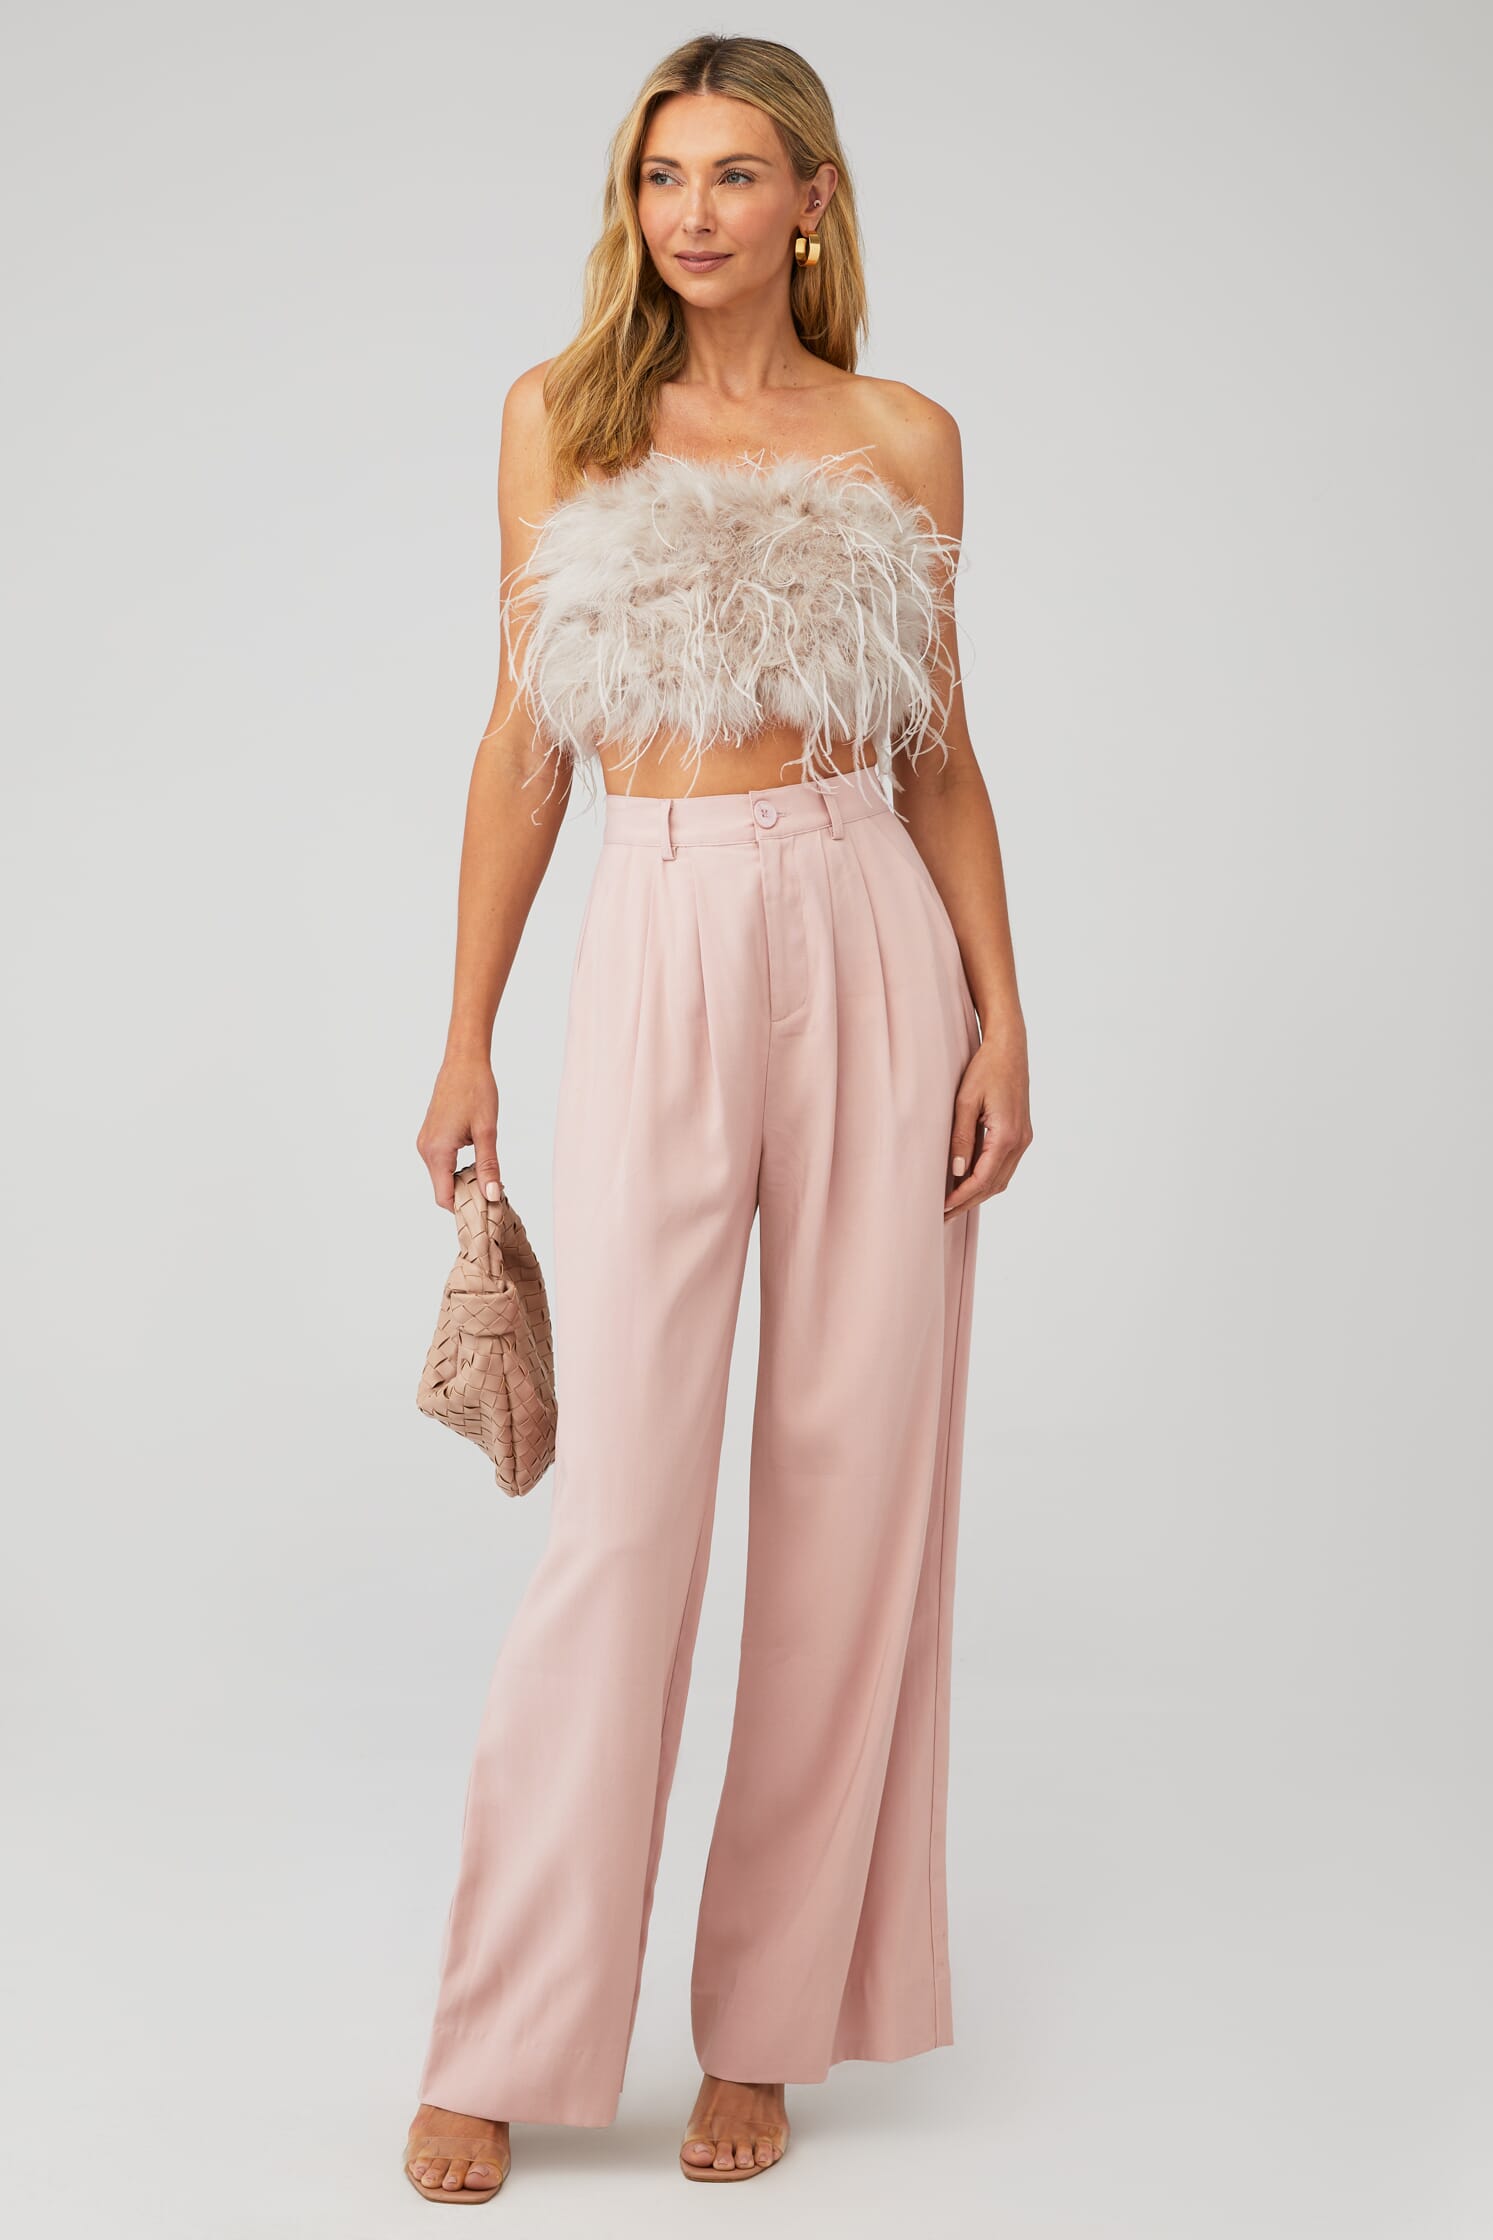 LAMARQUE, Zaina Top in Feather Pink